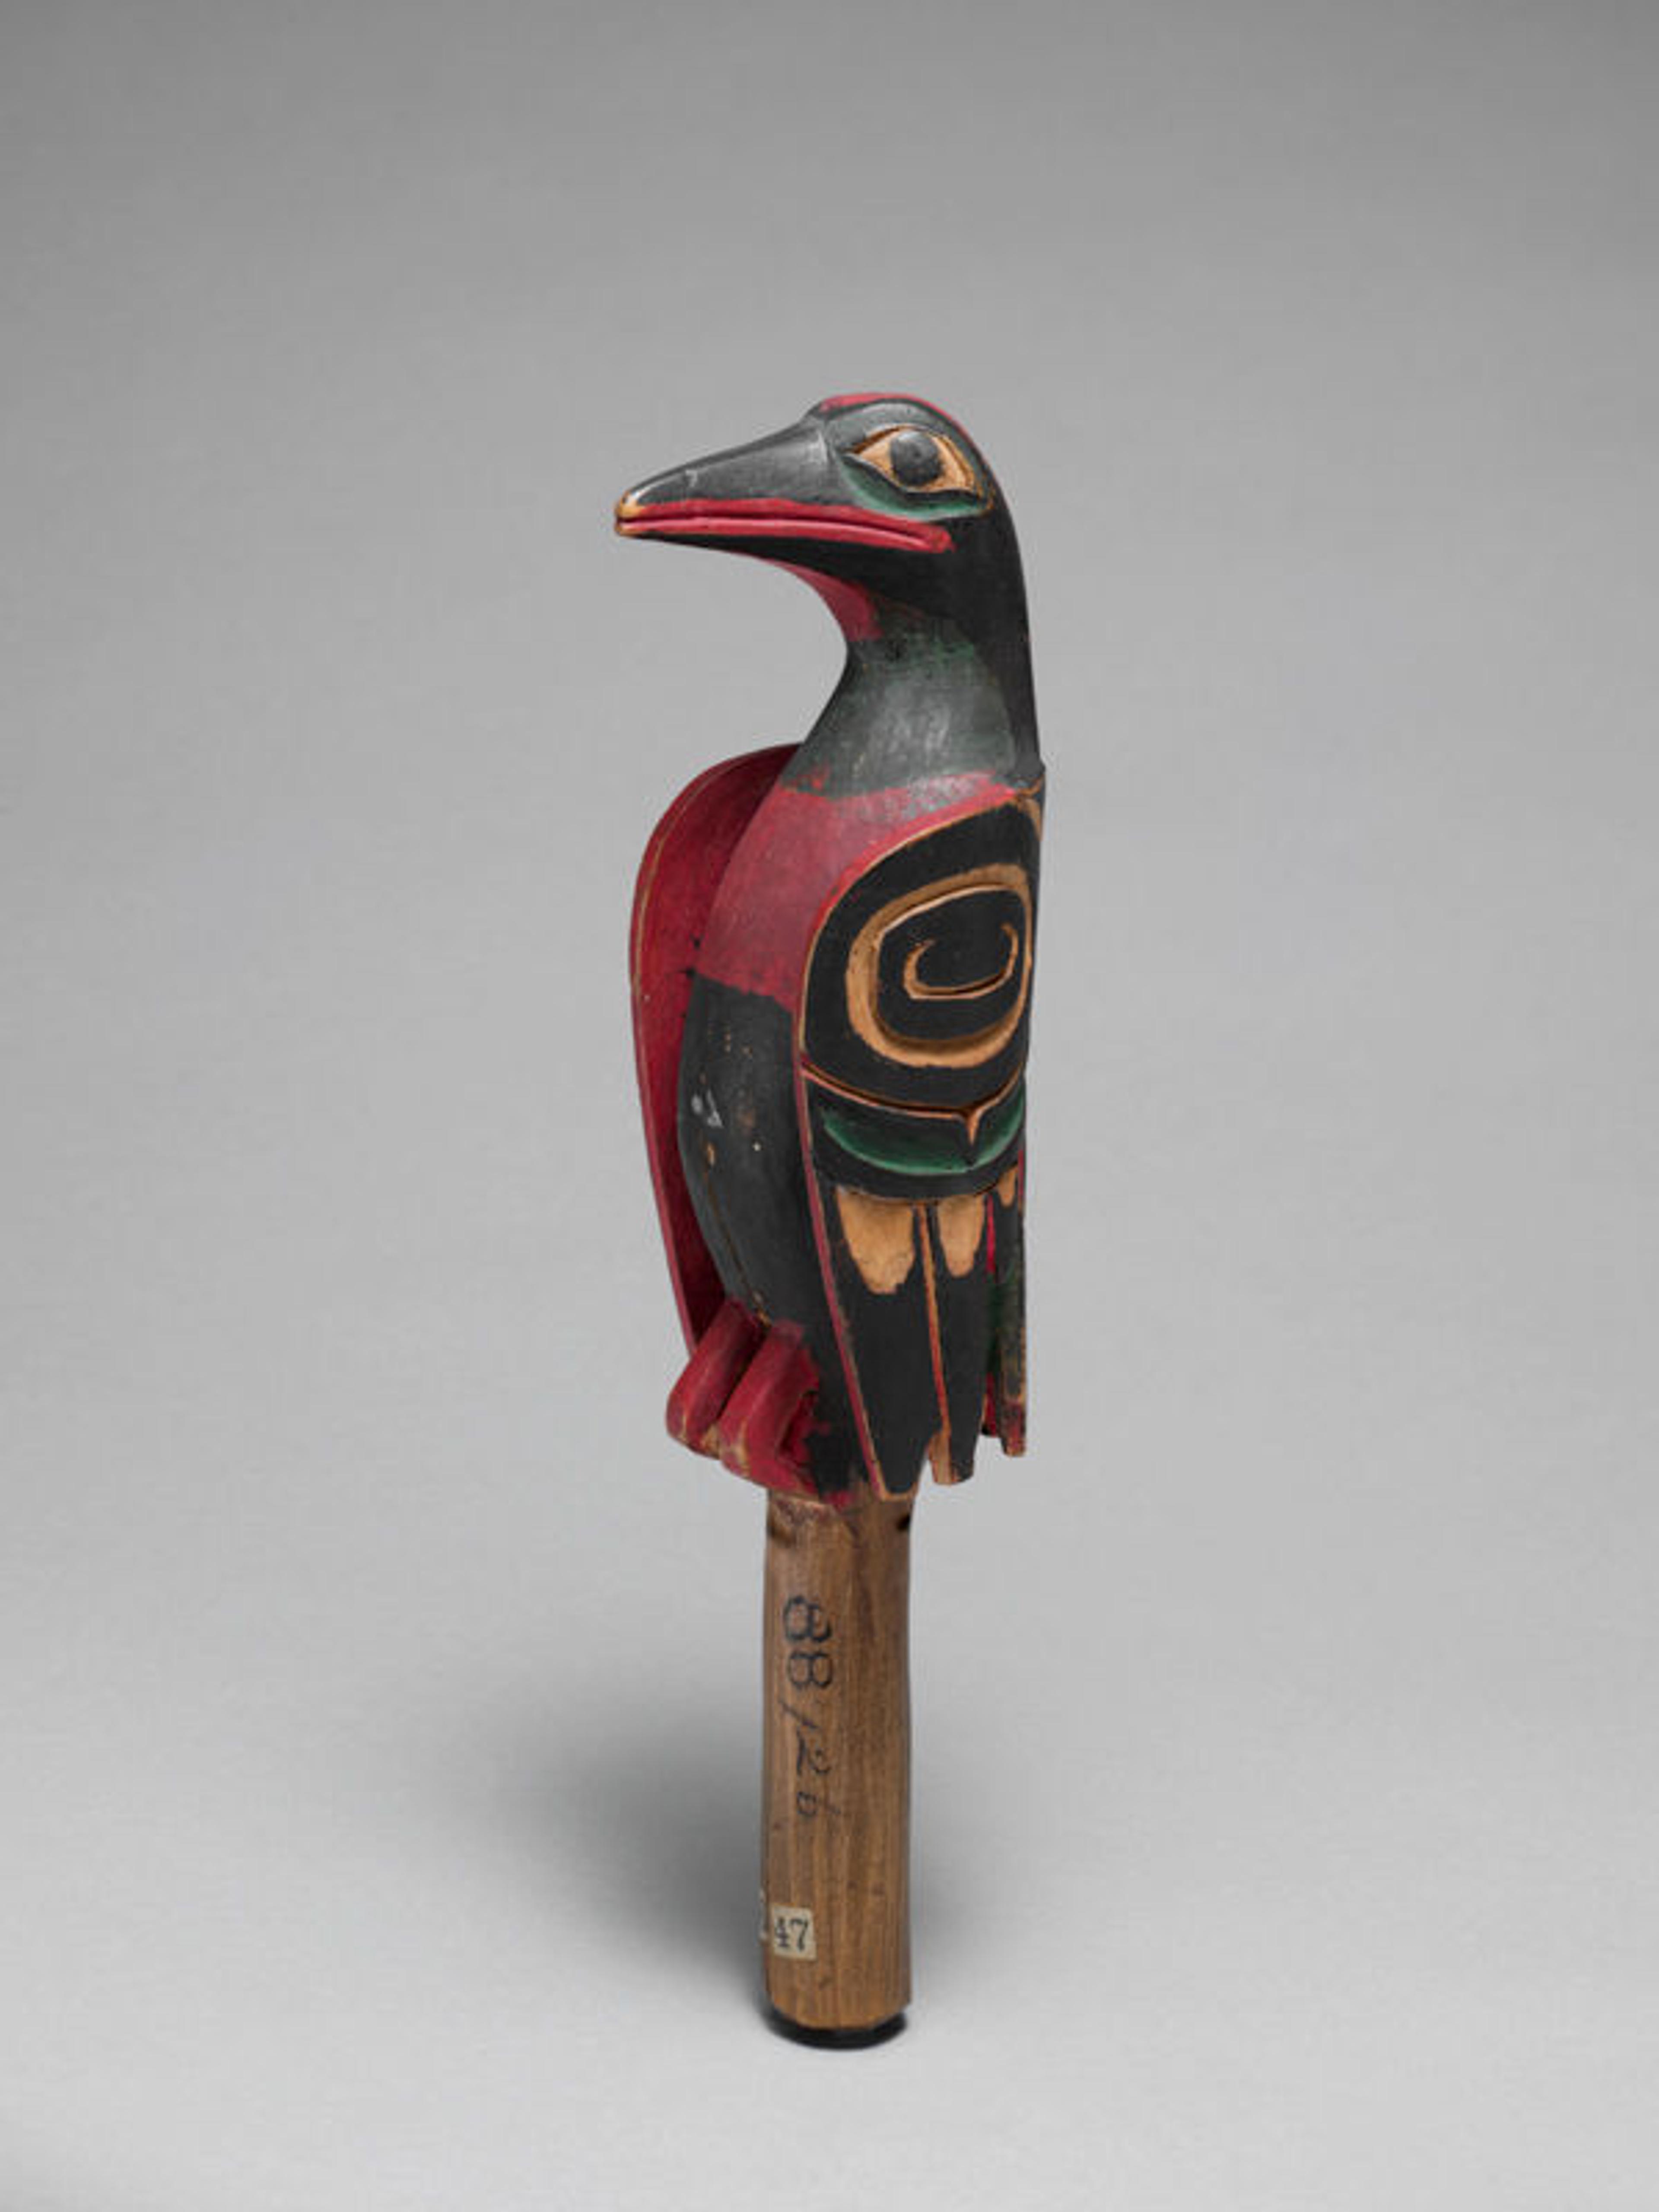 Rattle, 19th century | British Columbia, Canada. Native American (Masseth or Haida) | The Metropolitan Museum of Art, New York, The Crosby Brown Collection of Musical Instruments, 1889 (89.4.647)